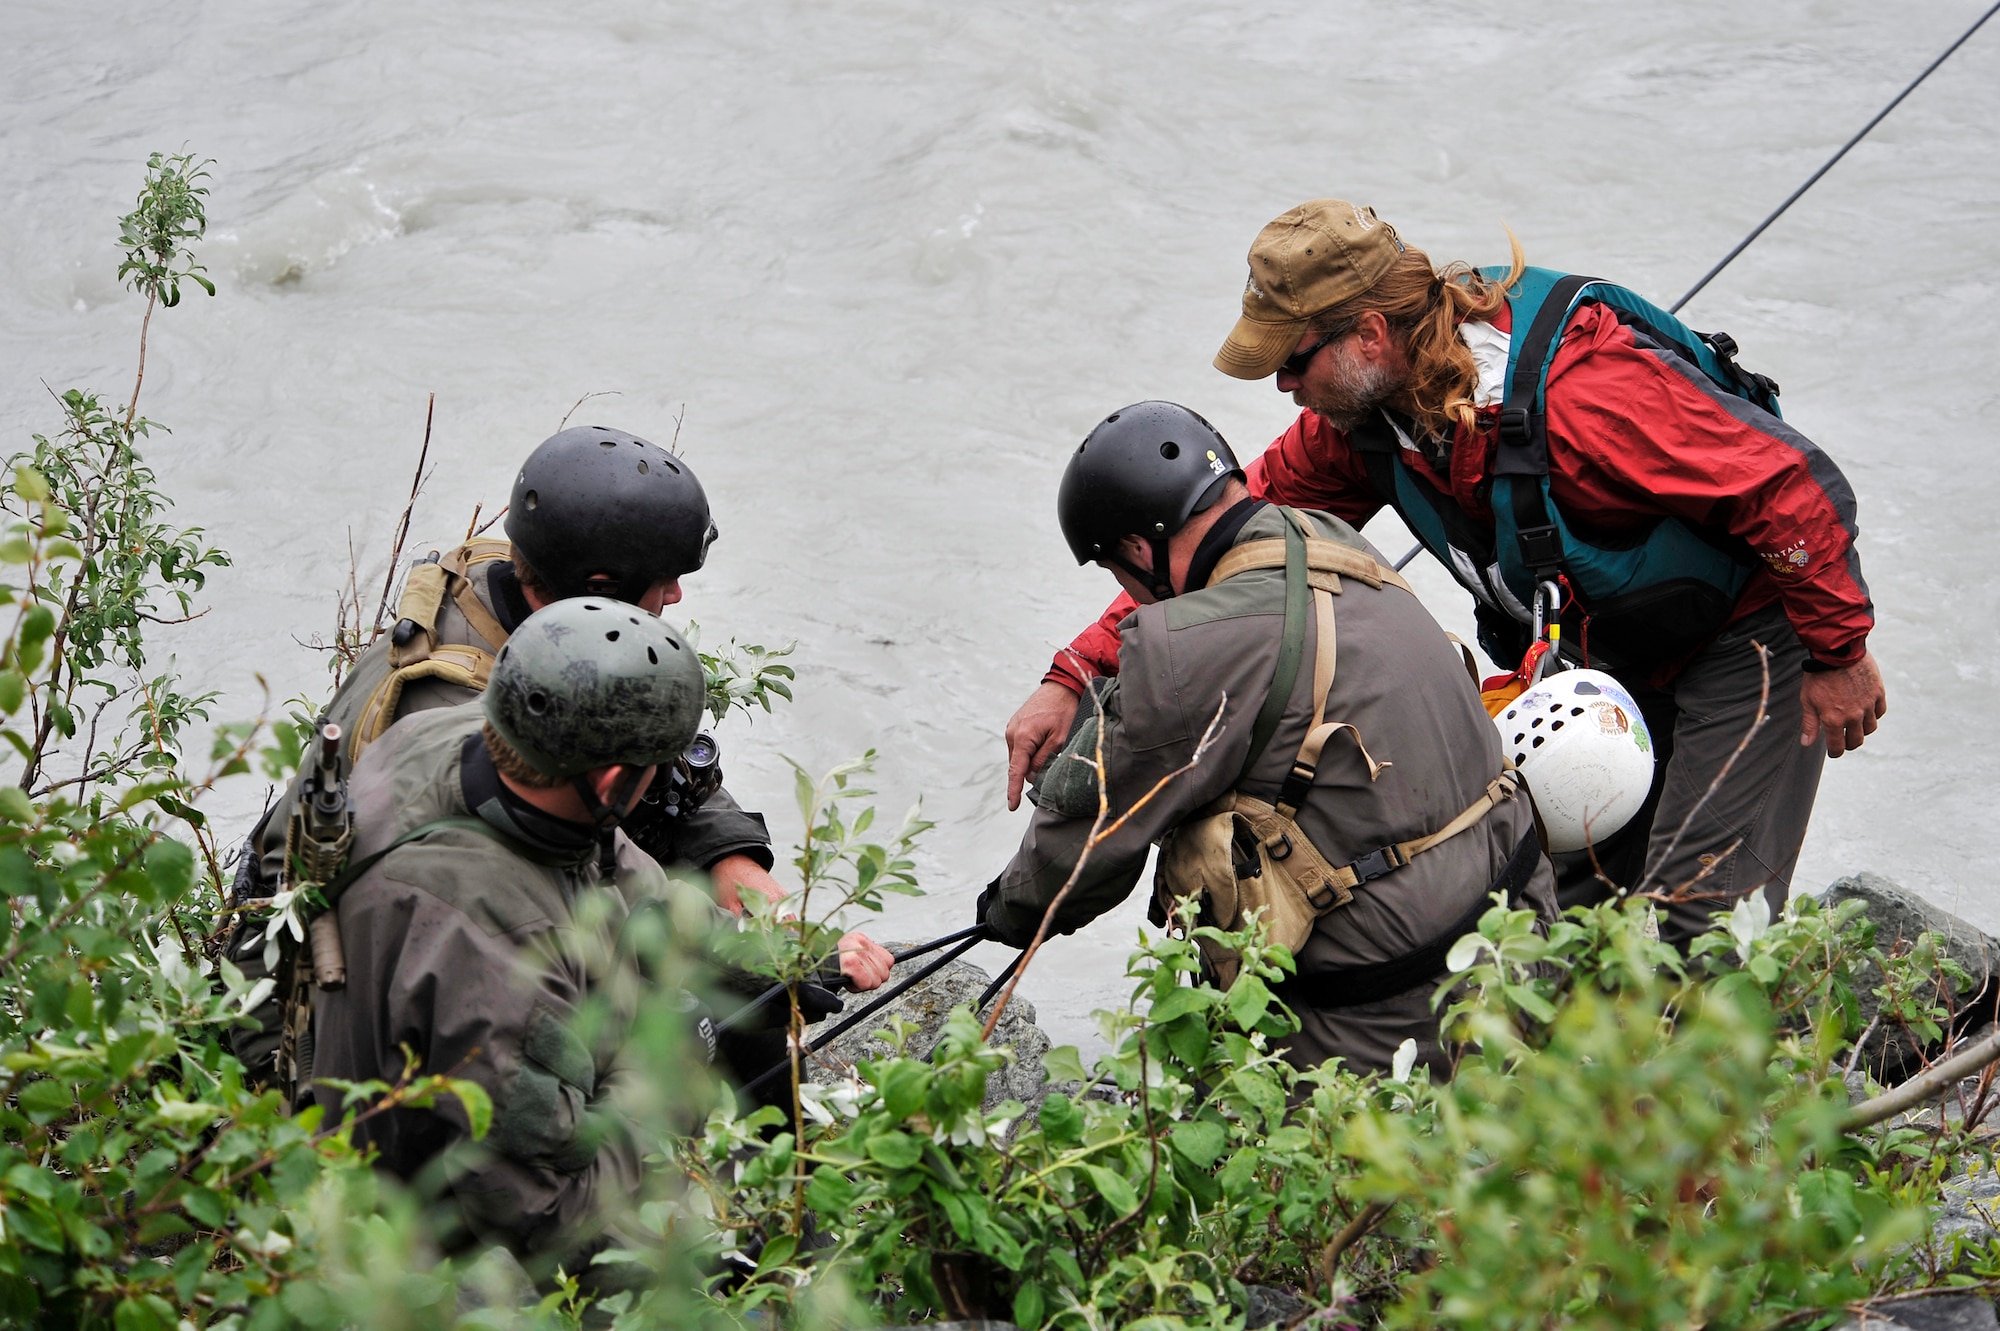 FORT WAINWRIGHT, Alaska -- Mr. Steven Decker teaches a group of Navy SEALs rope techniques during a river crossing exercise at Phelan Creek during NORTHERN EDGE 2009, June 17. NE09 is a large scale exercise hosted in Alaska to improve command, control and communications between the Armed Services. Mr. Decker is an instructor at the Northern Warfare Training Center. (U.S. Air Force photo/Staff Sgt. Christopher Boitz)